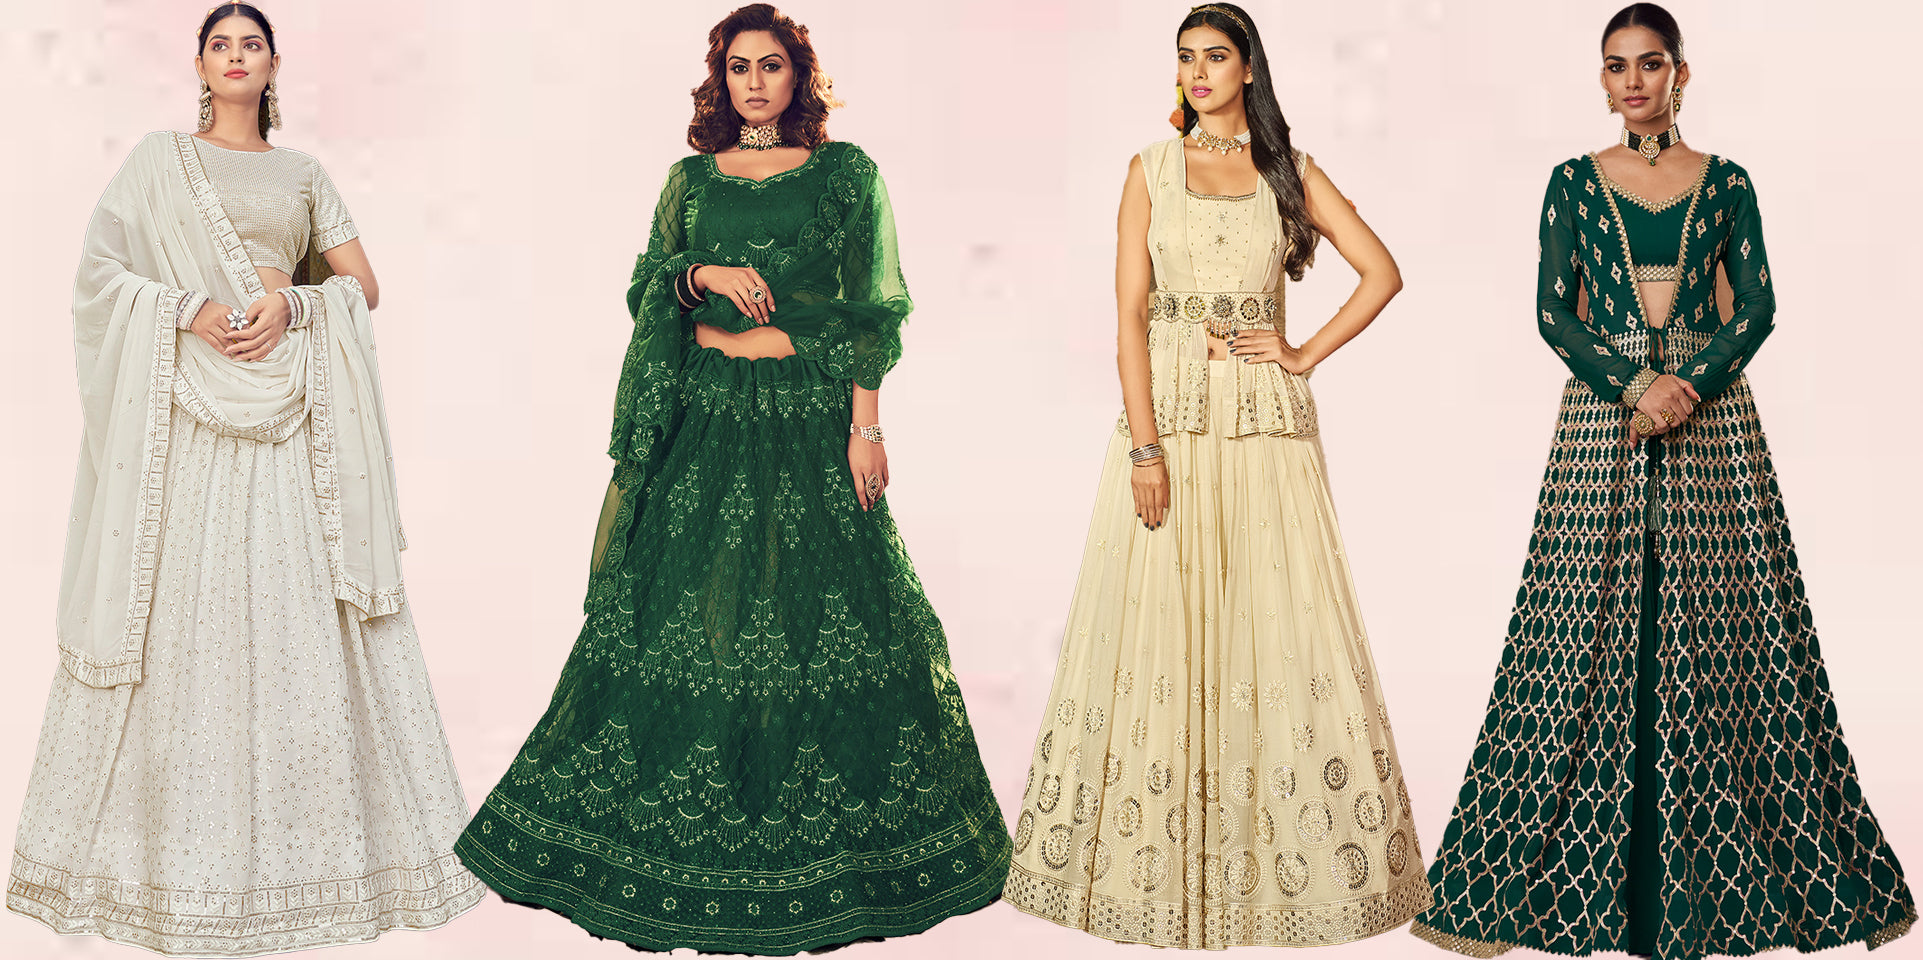 What are the Must-Have Lehengas for the Upcoming Festive Season?